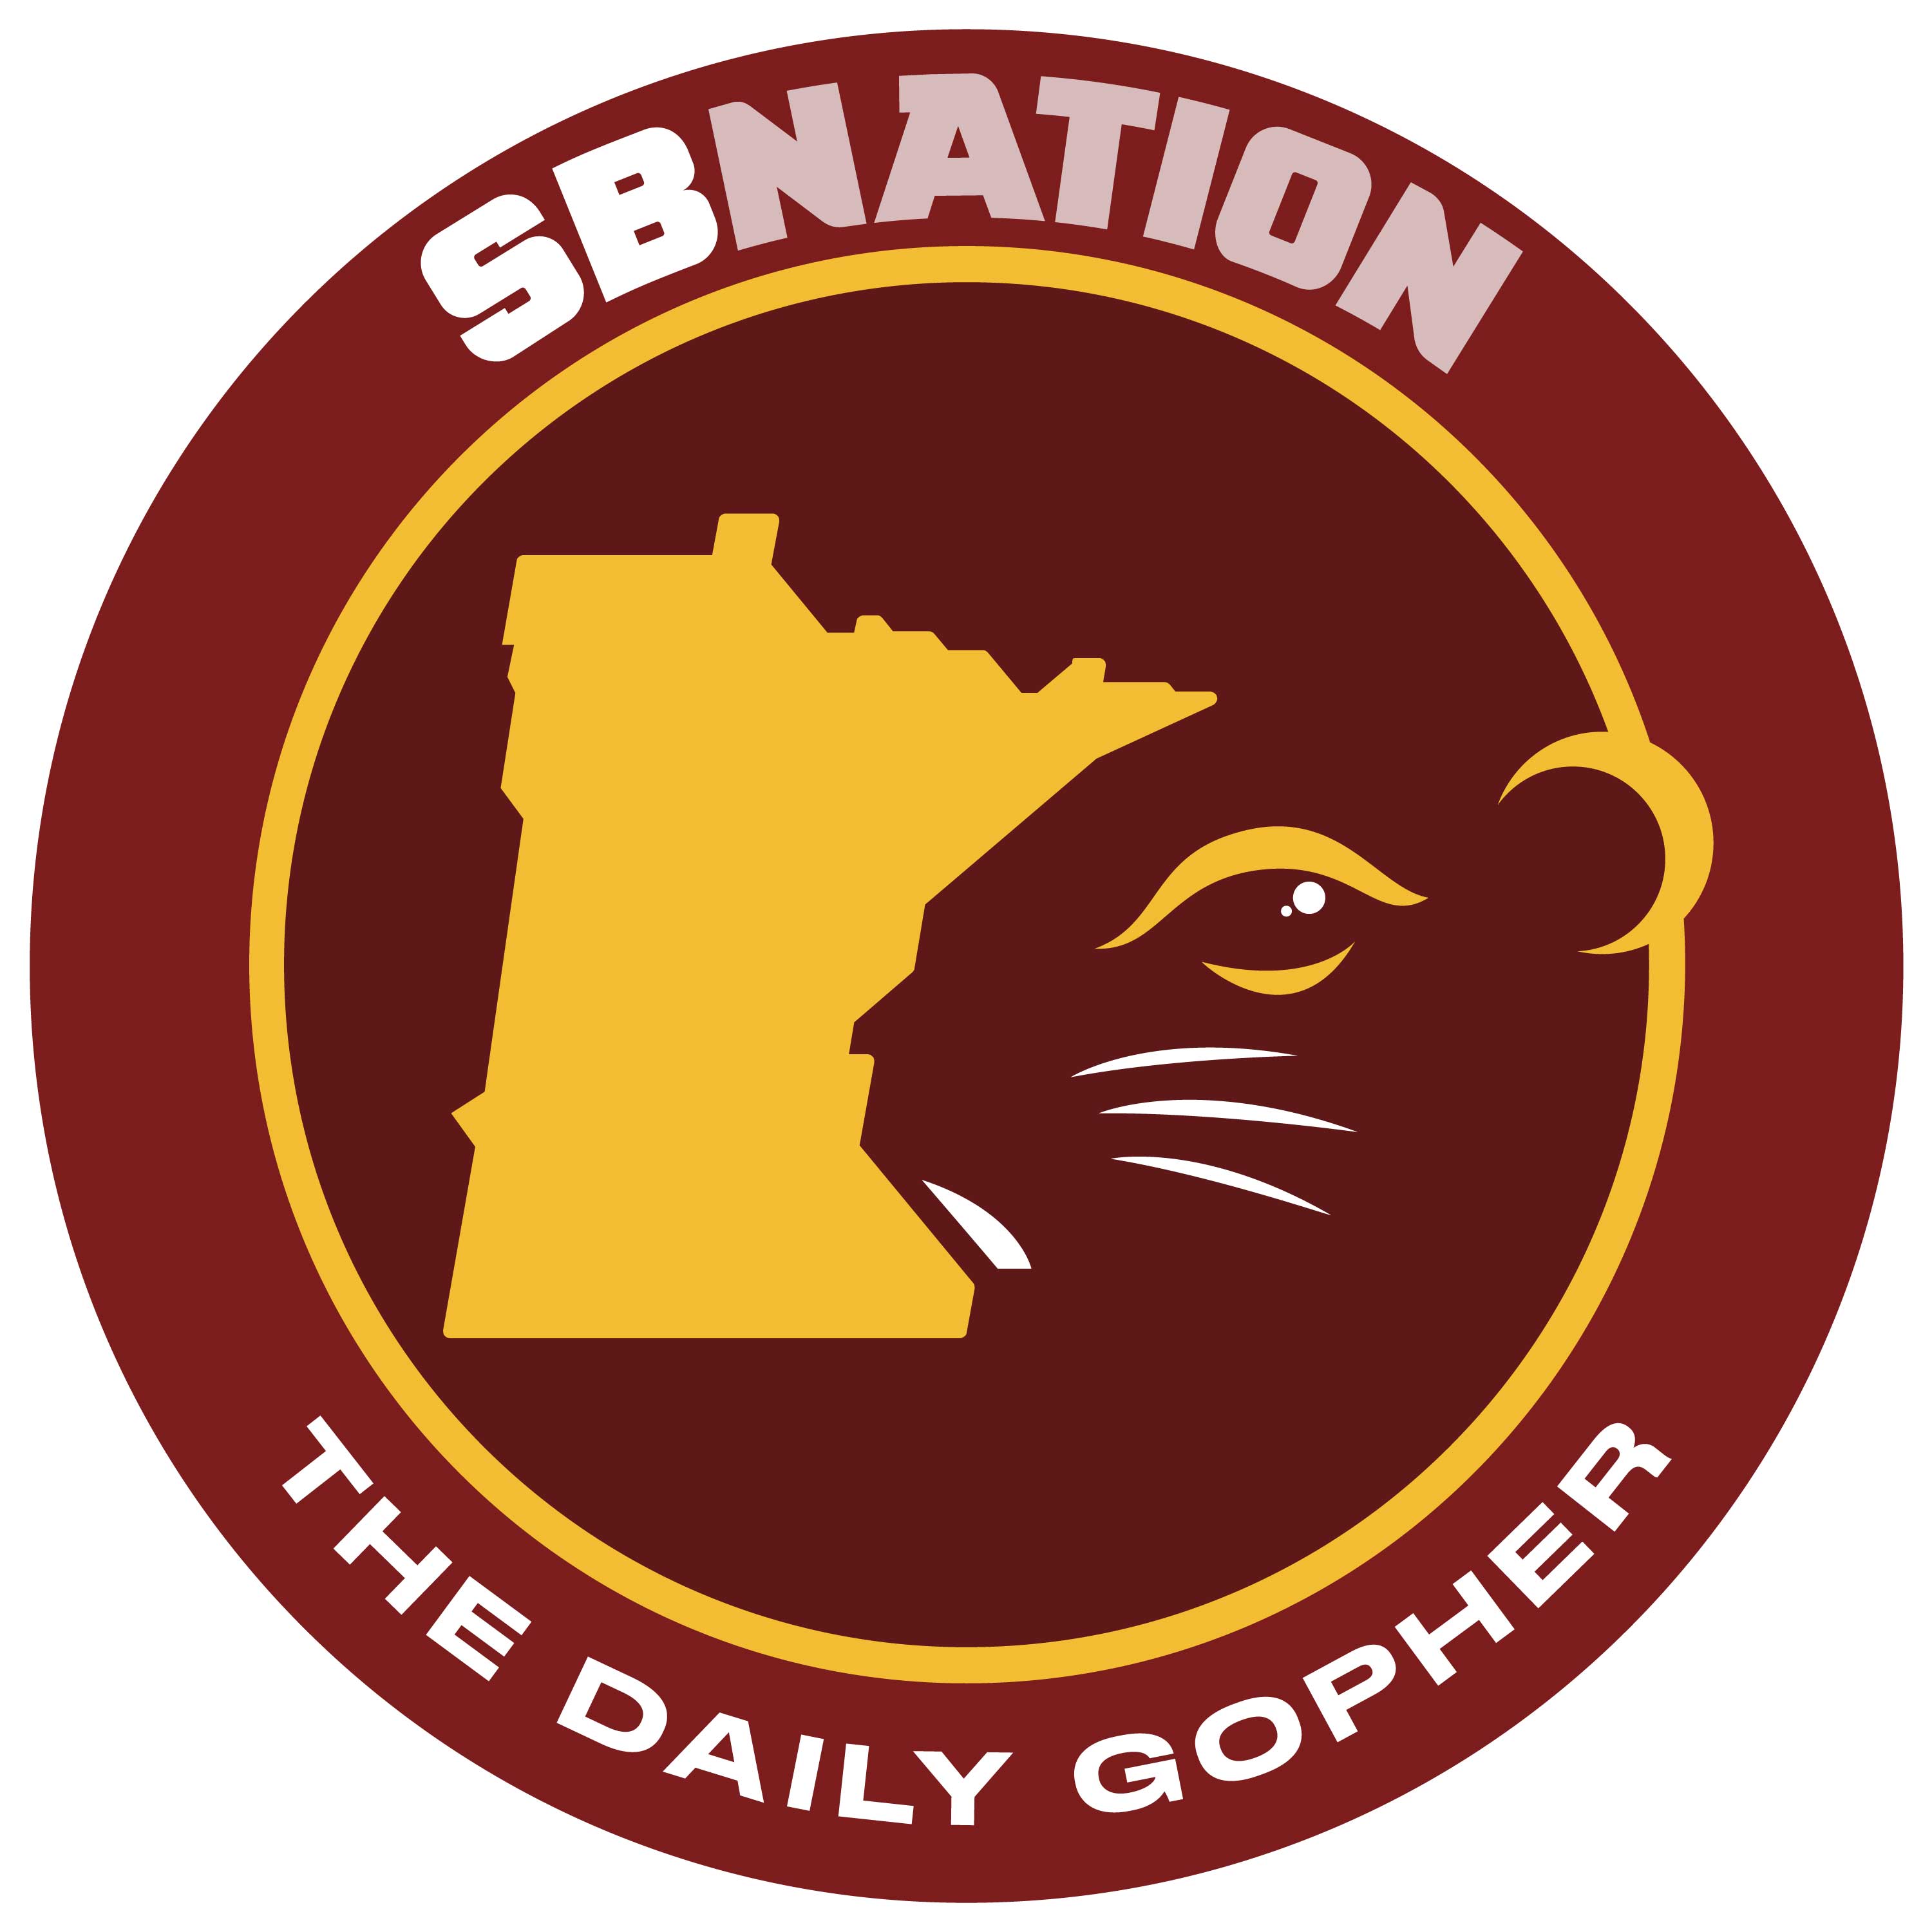 The Daily Gopher